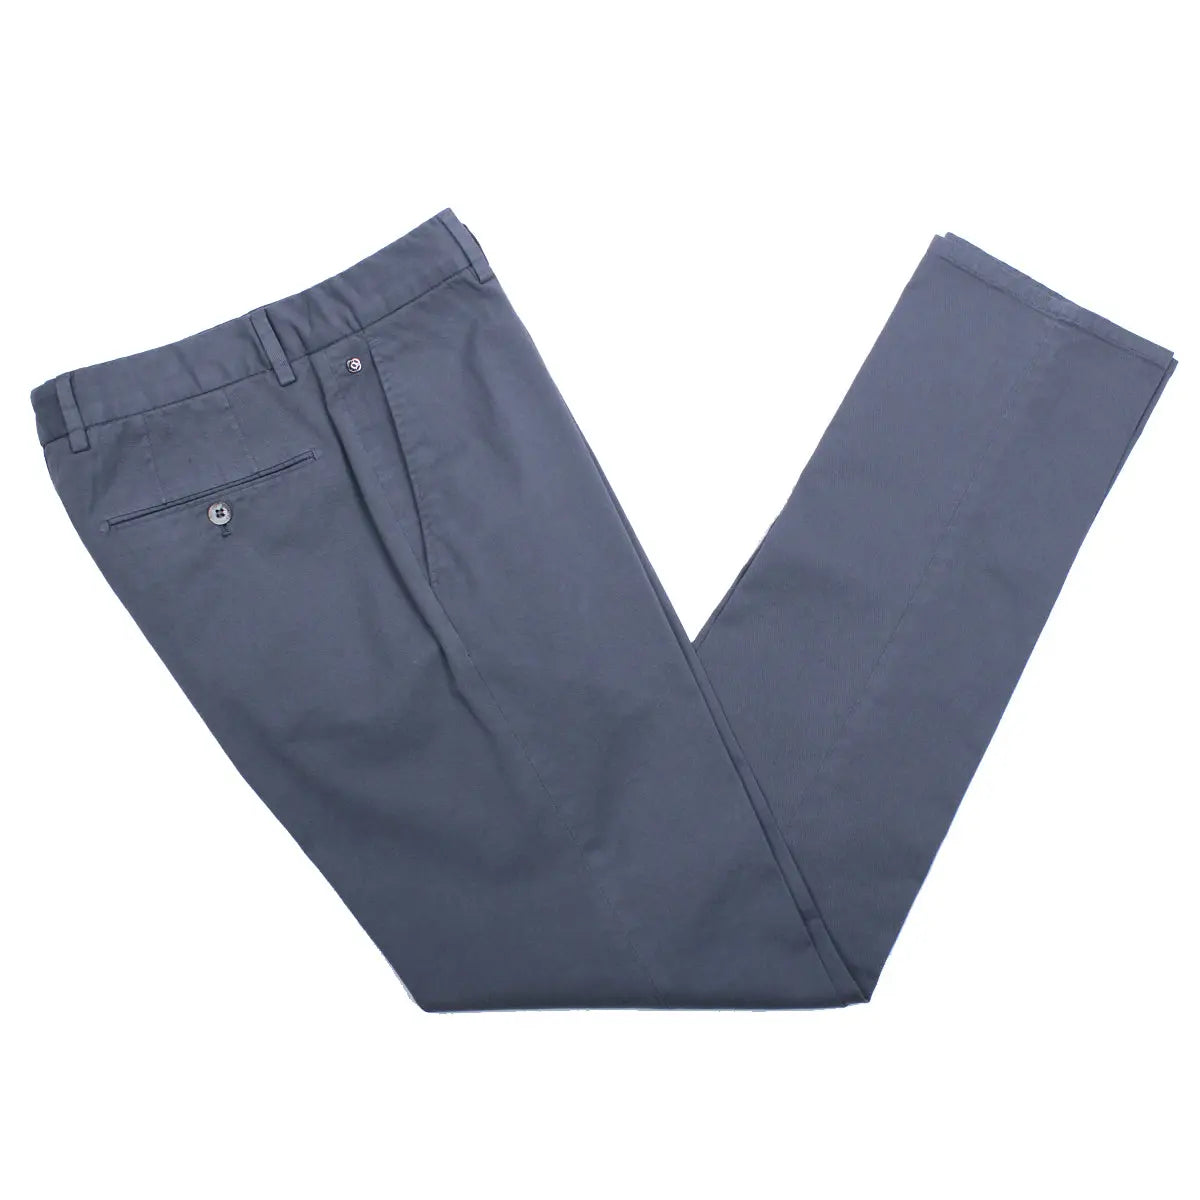 Mid-Grey Cotton Stretch Slim Fit Chinos  Robert Old   